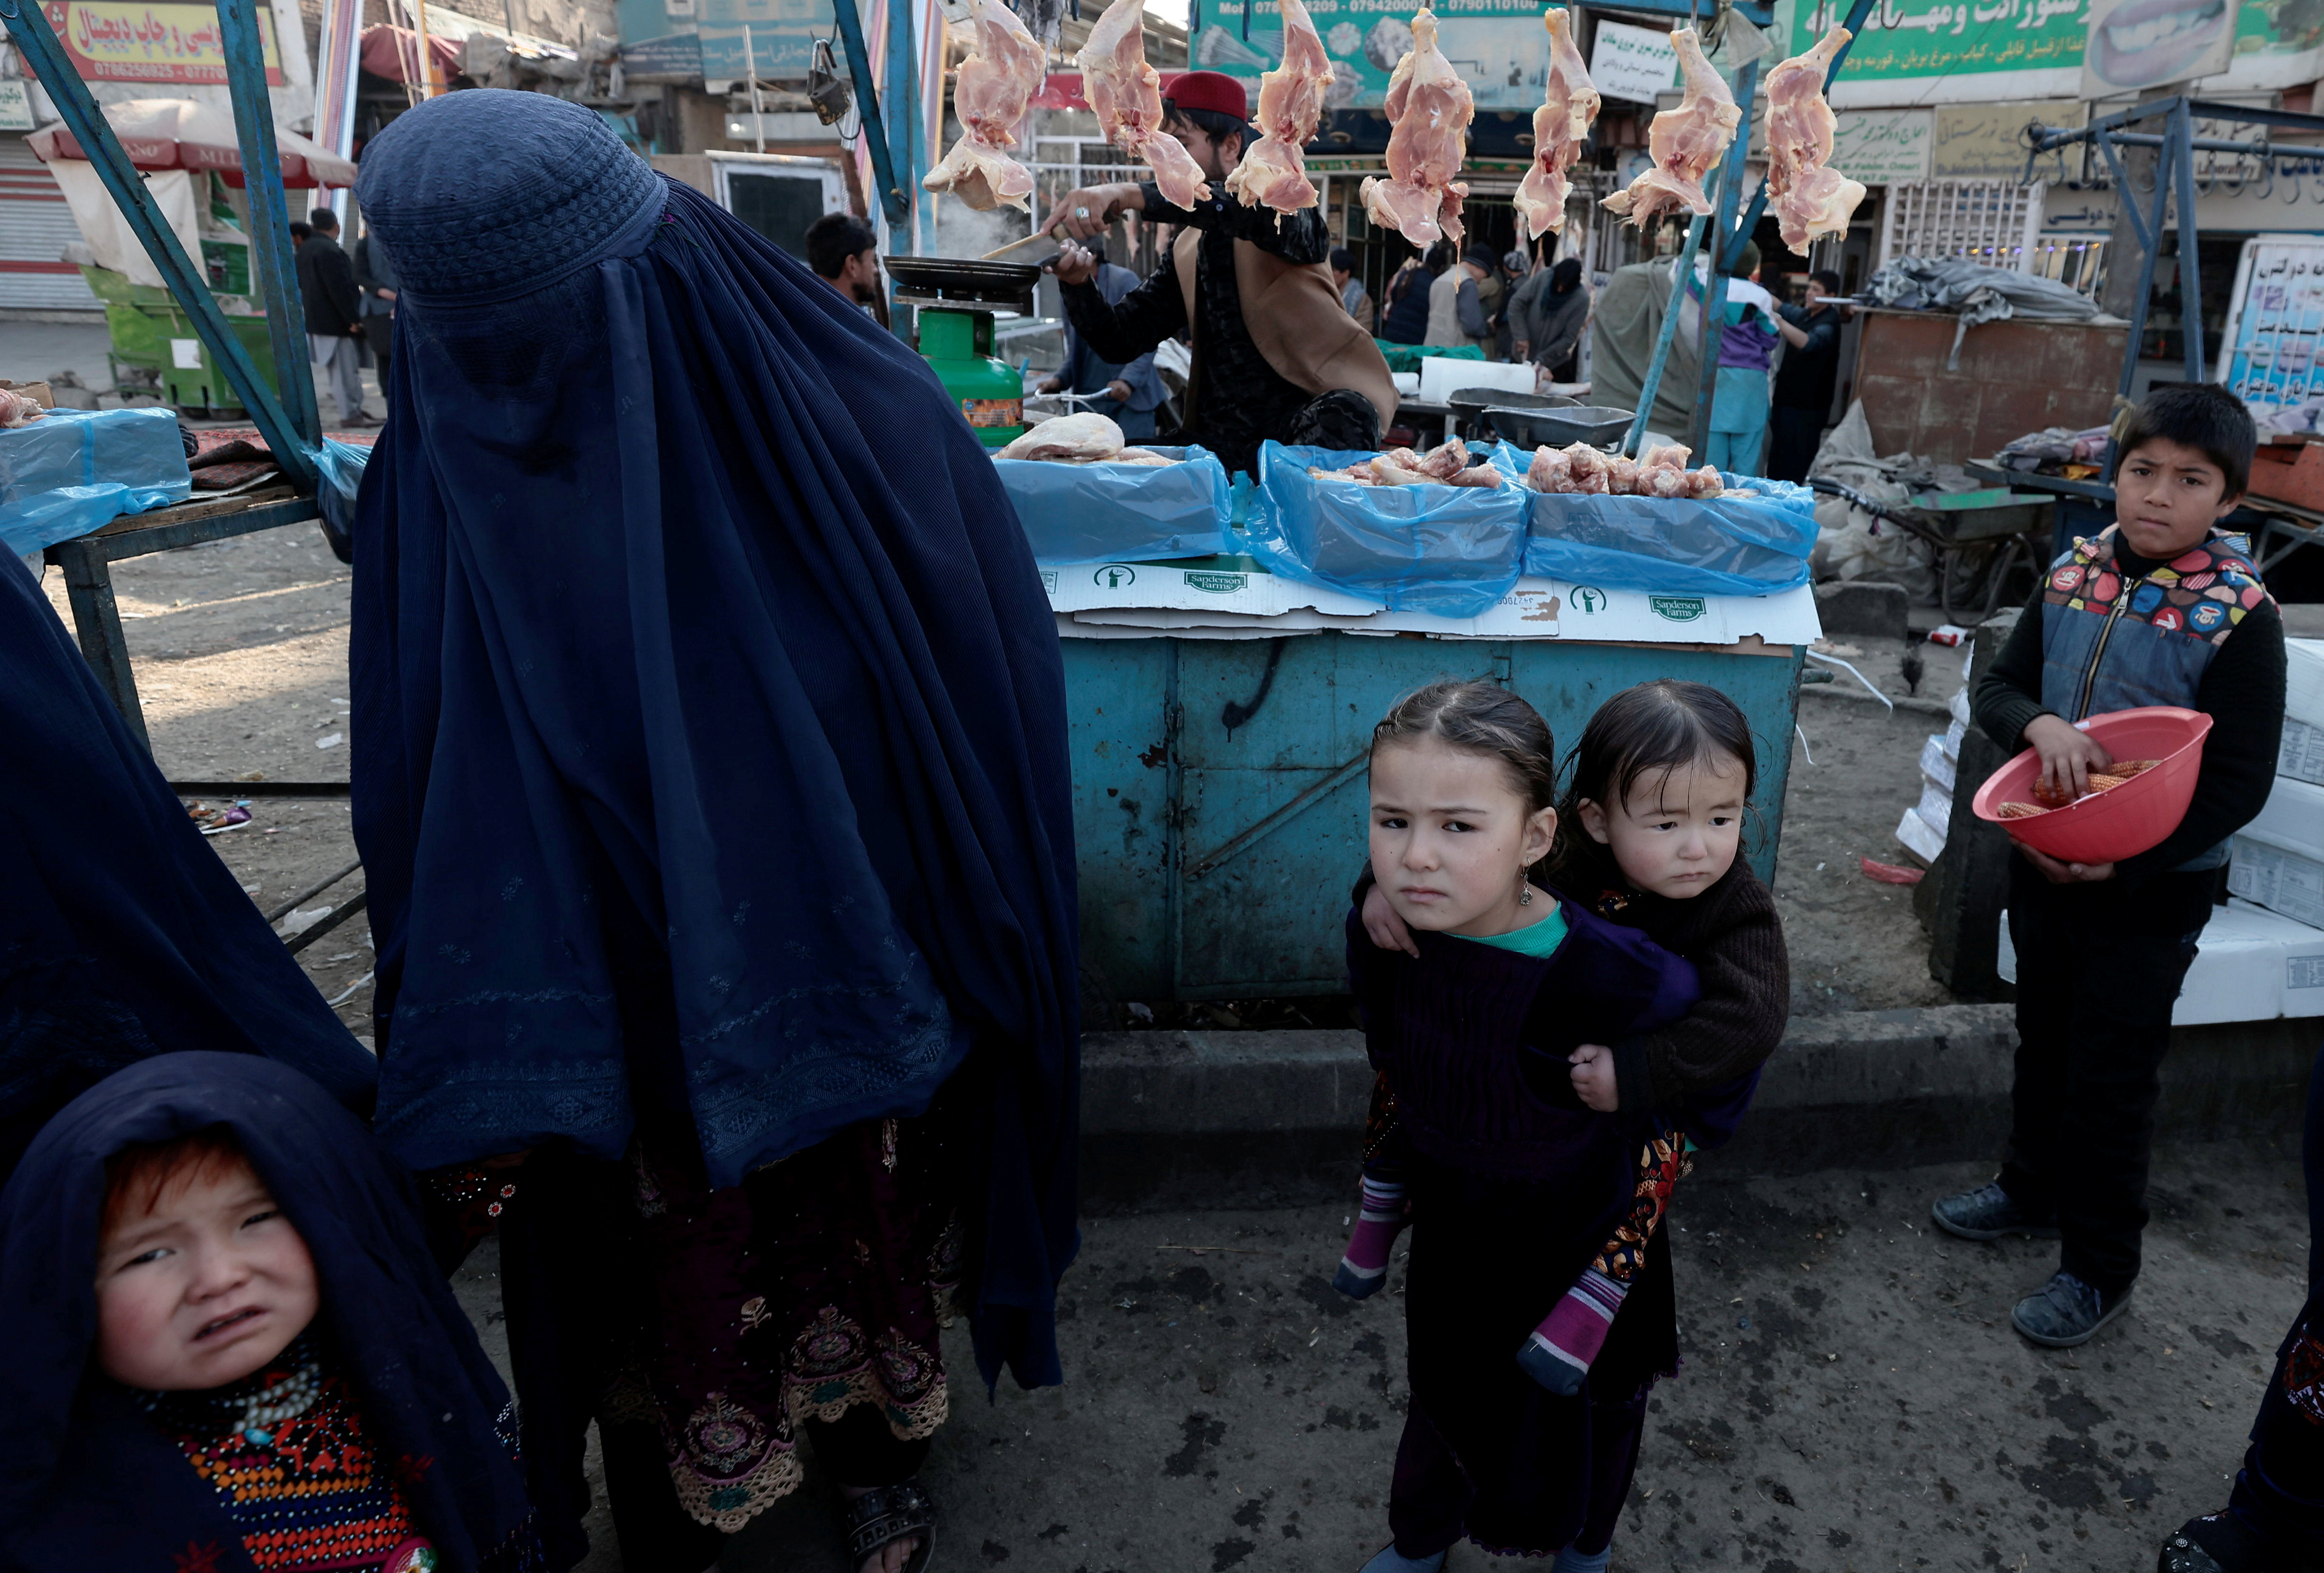 A mother shops with her children at the market in Kabul, Afghanistan October 29, 2021. REUTERS/Zohra Bensemra